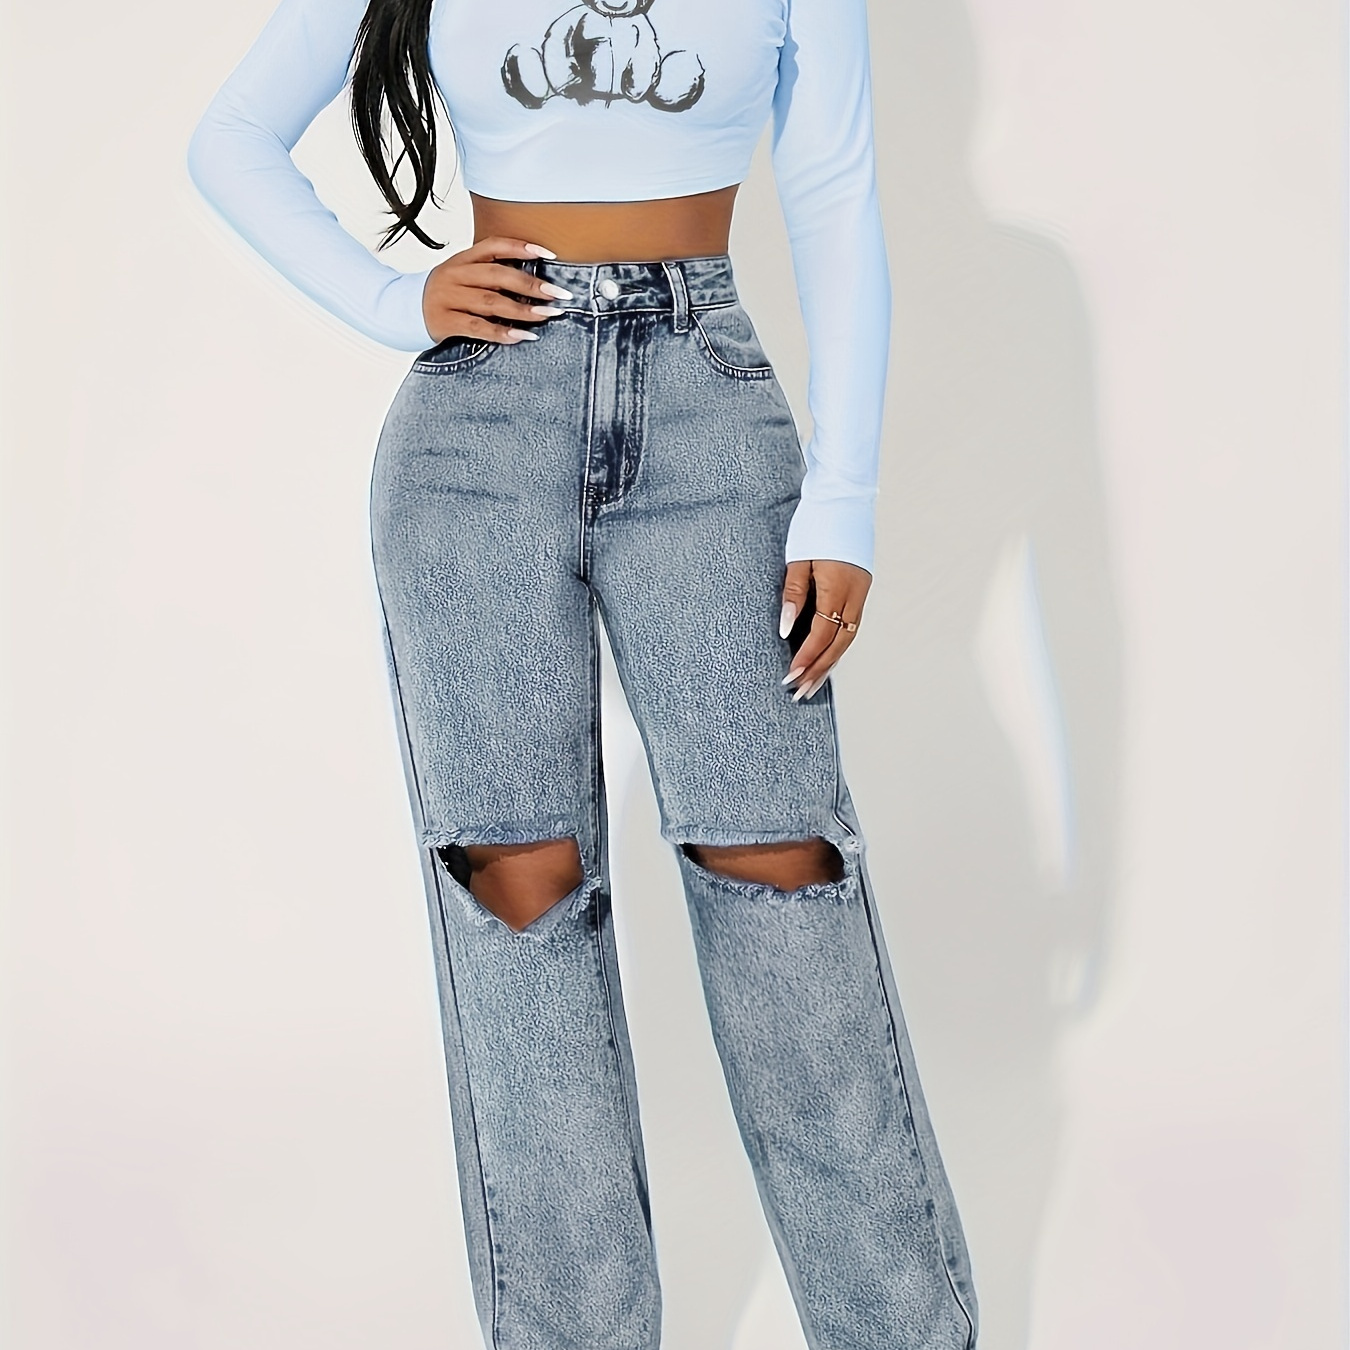 

Acid Wash High-rise Blue Jeans, Distressed Loose Fit Straight Leg Knee Ripped Jean Pants, Women's Clothing & Denim